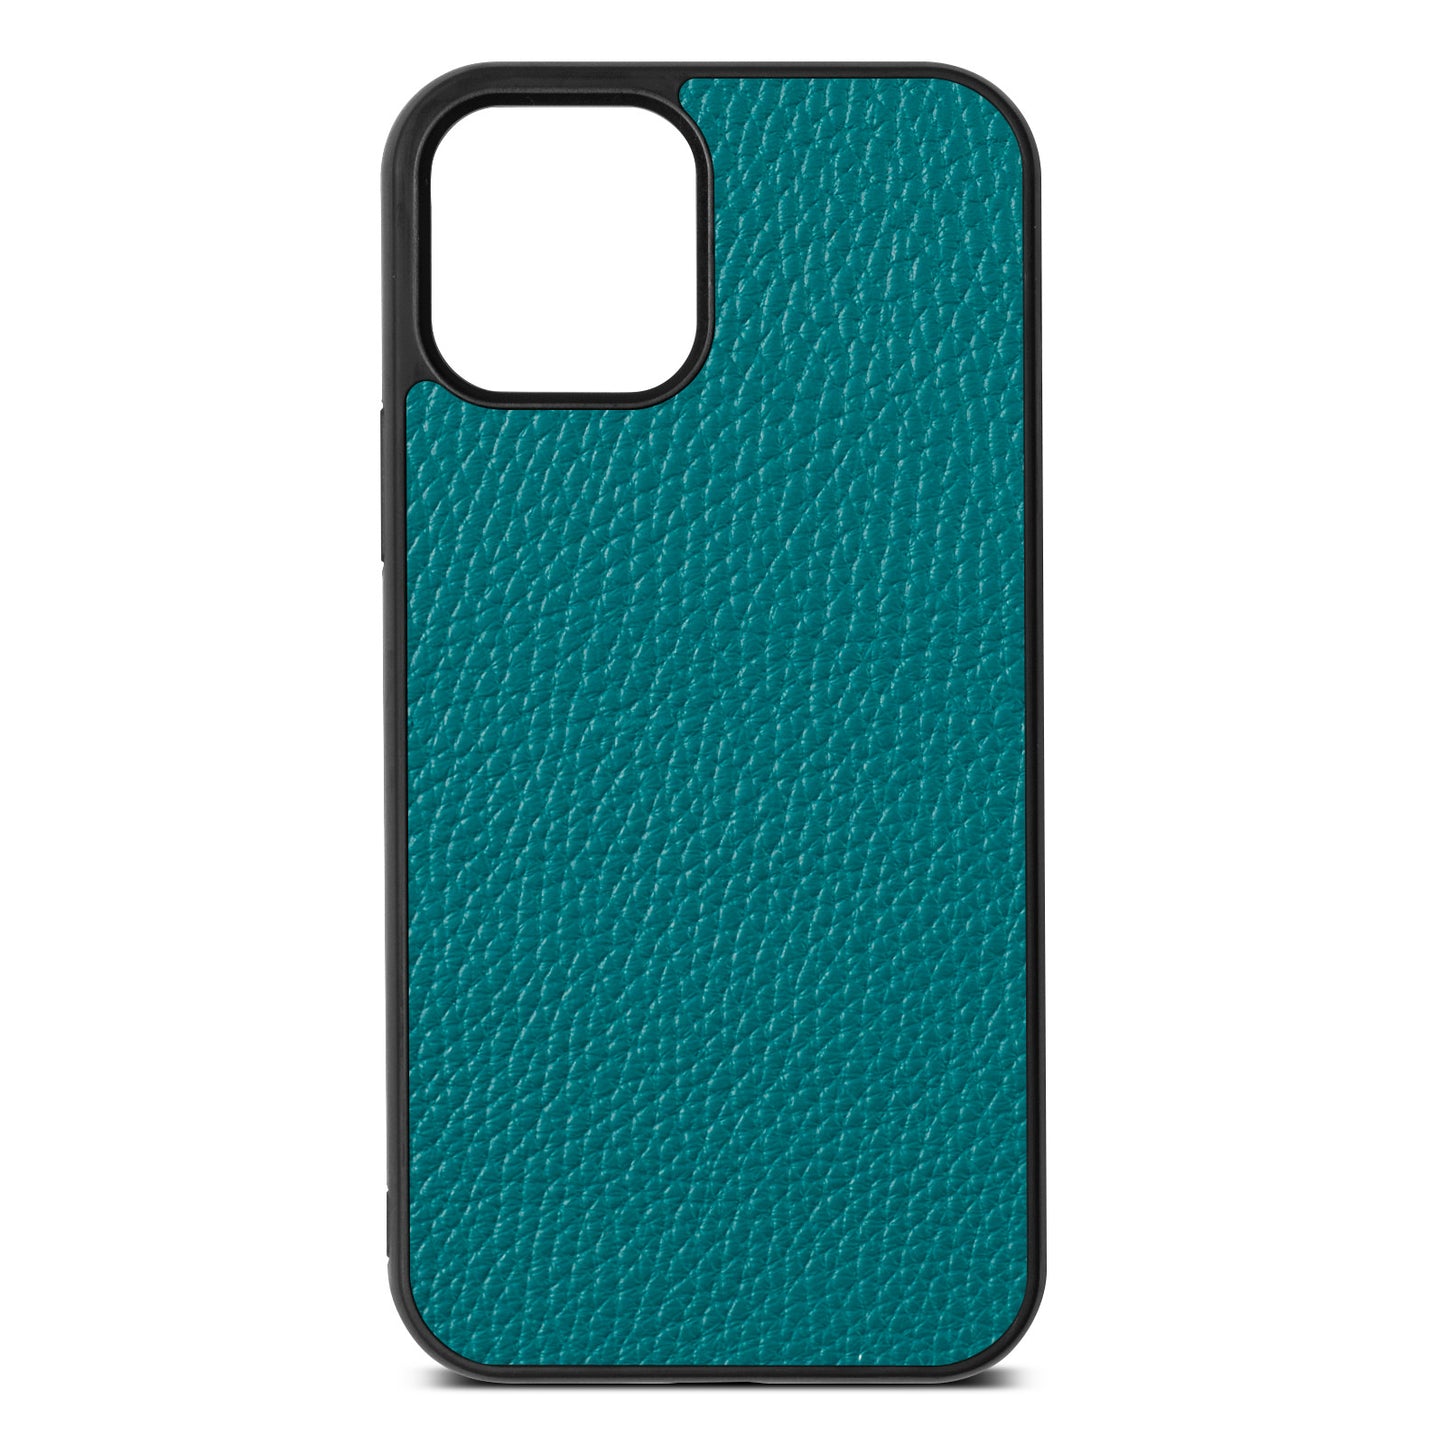 Blank iPhone 12 Pebble Green Leather iPhone Case